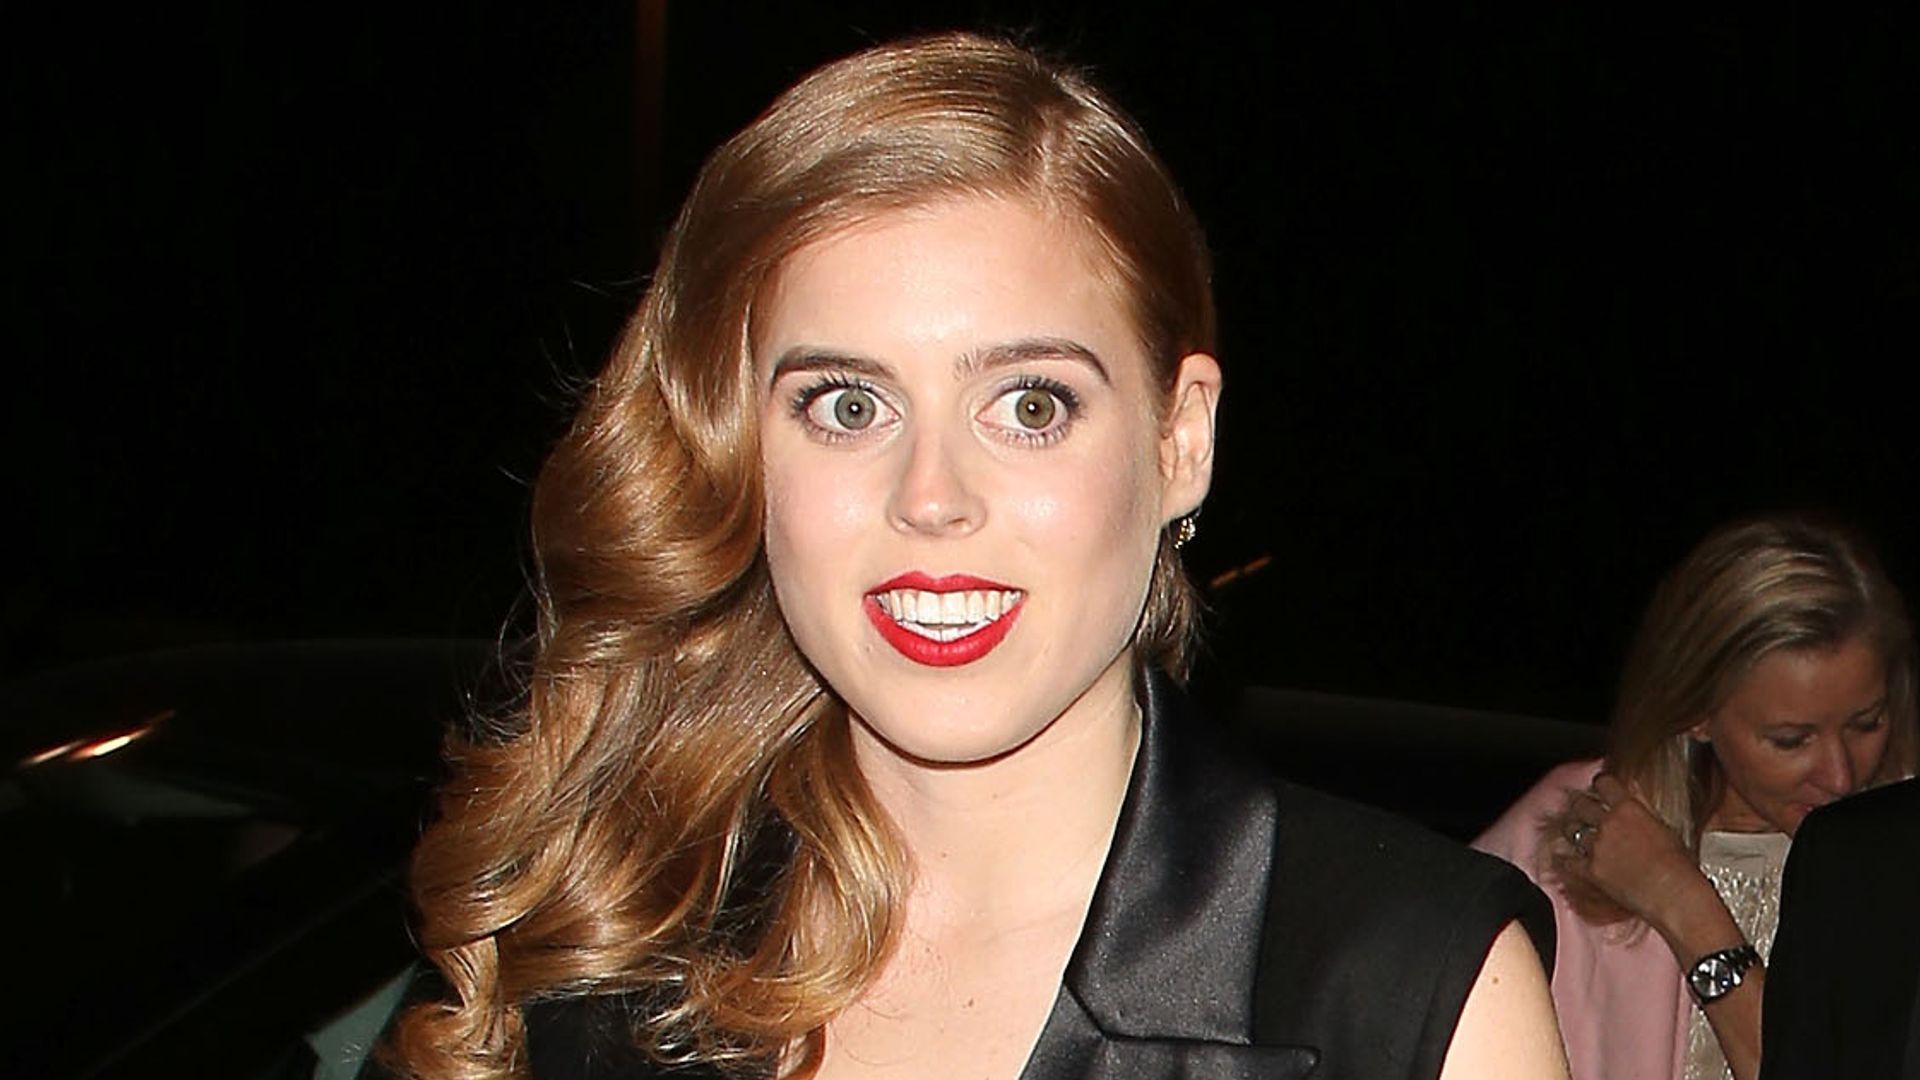 Princess Beatrice attending the Alexander McQueen: Savage Beauty Fashion Gala at the V&A on March 12, 2015 in London, England.